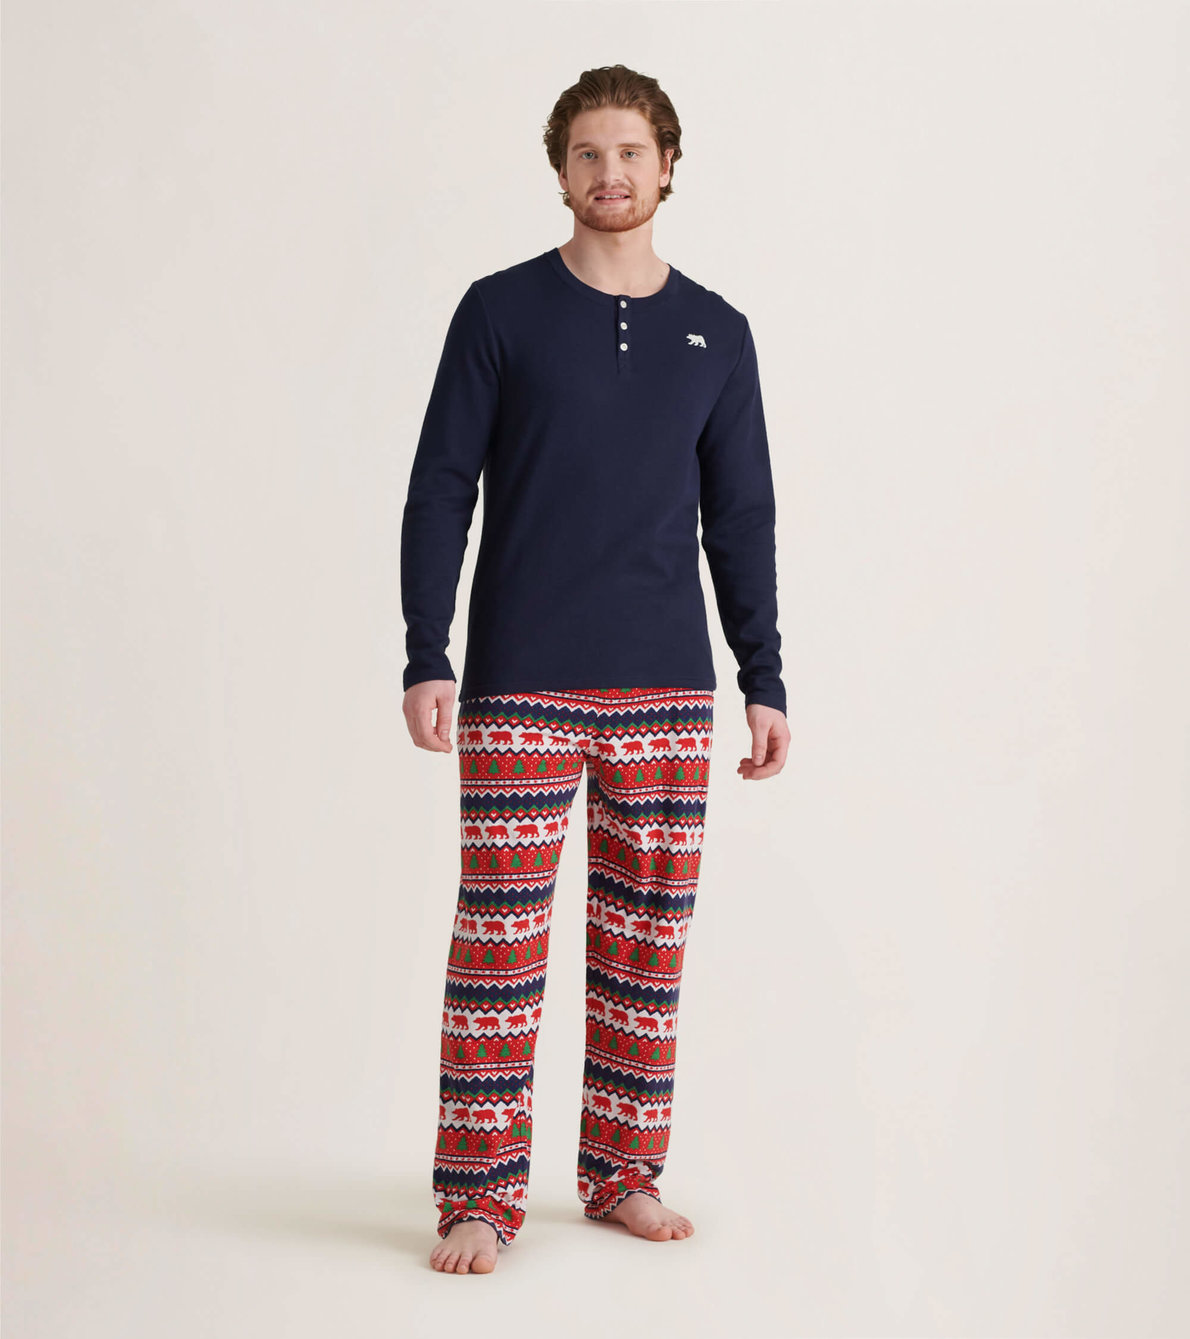 View larger image of Fair Isle Men's Henley and Pants Pajama Separates